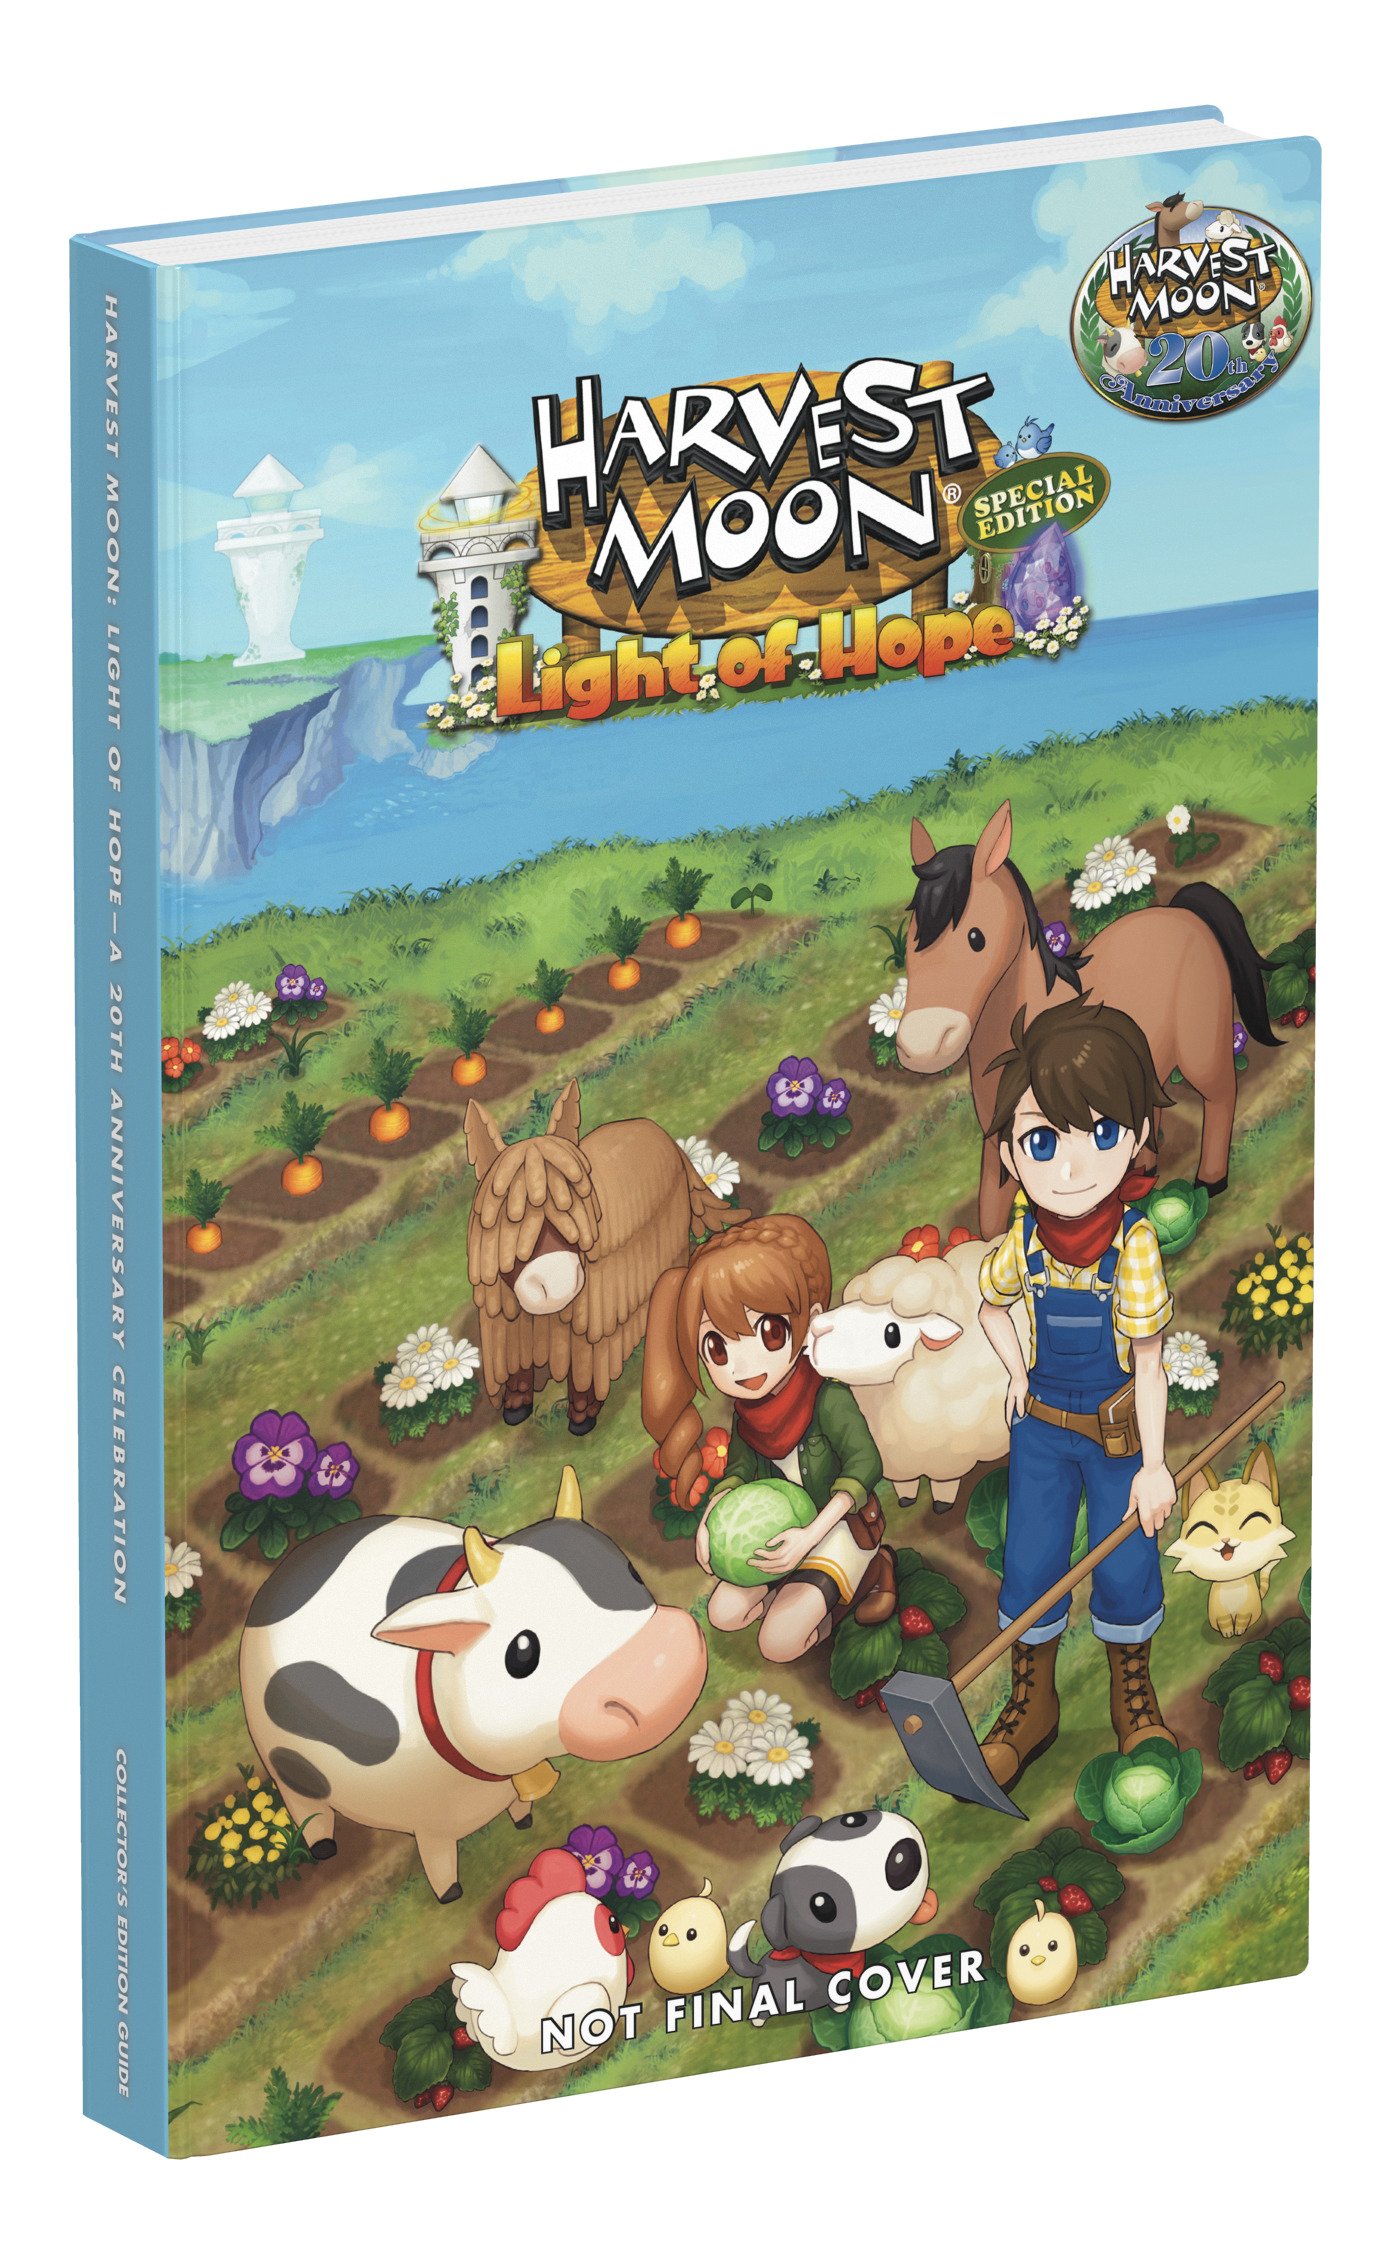 Harvest Moon: Light of Hope A 20th Anniversary Celebration Collector's